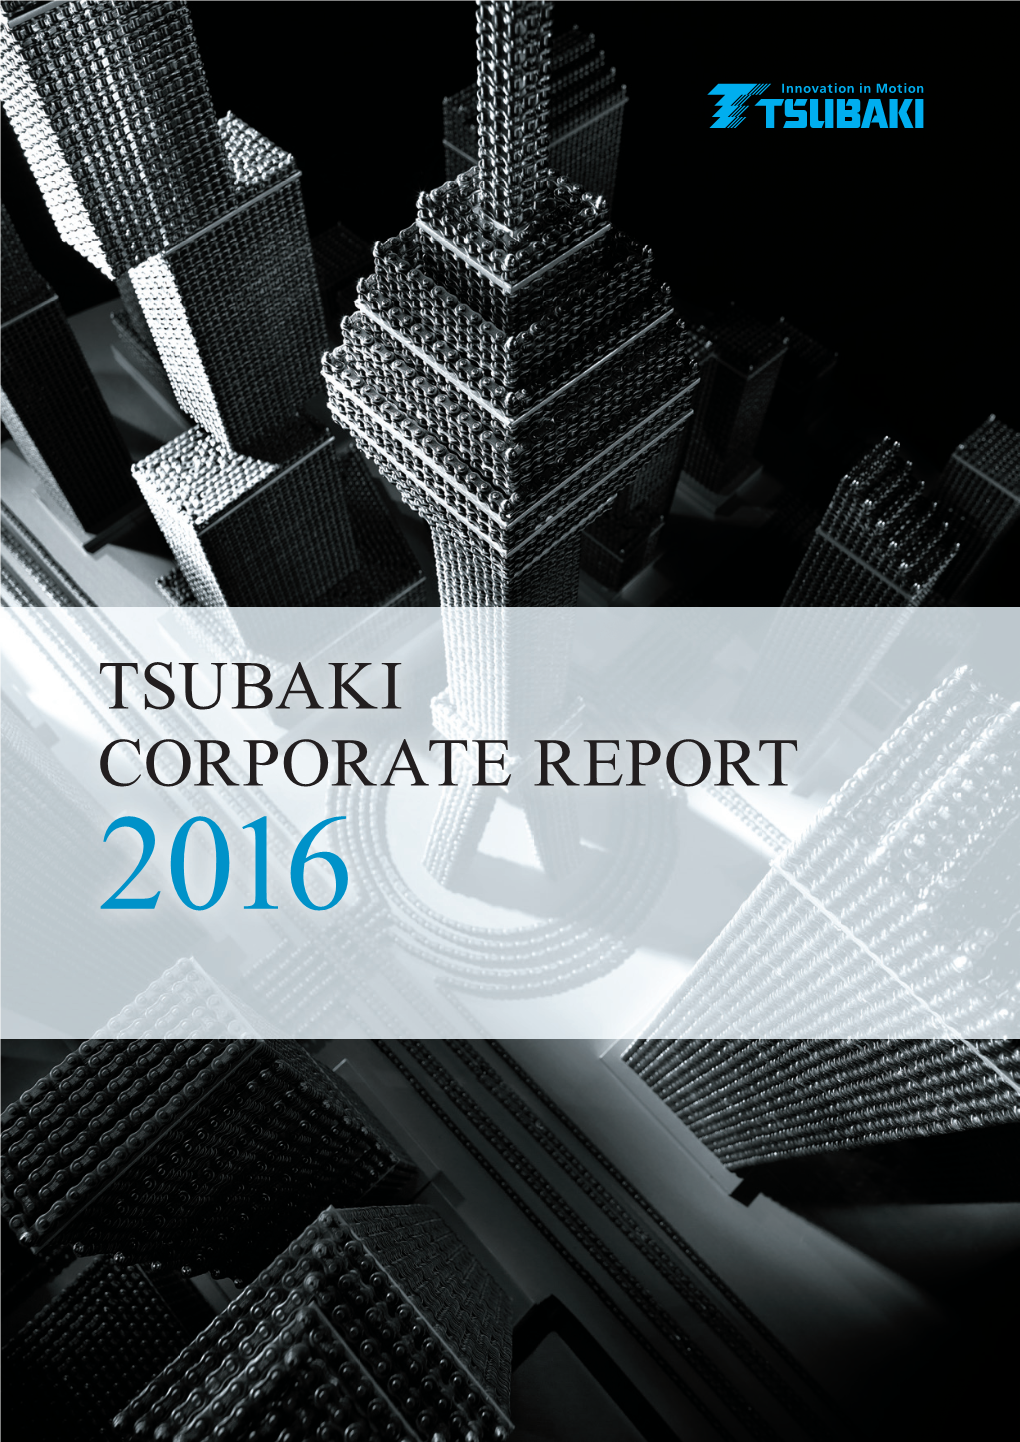 TSUBAKI CORPORATE REPORT 2016 Providing Customers Worldwide with the Best Value